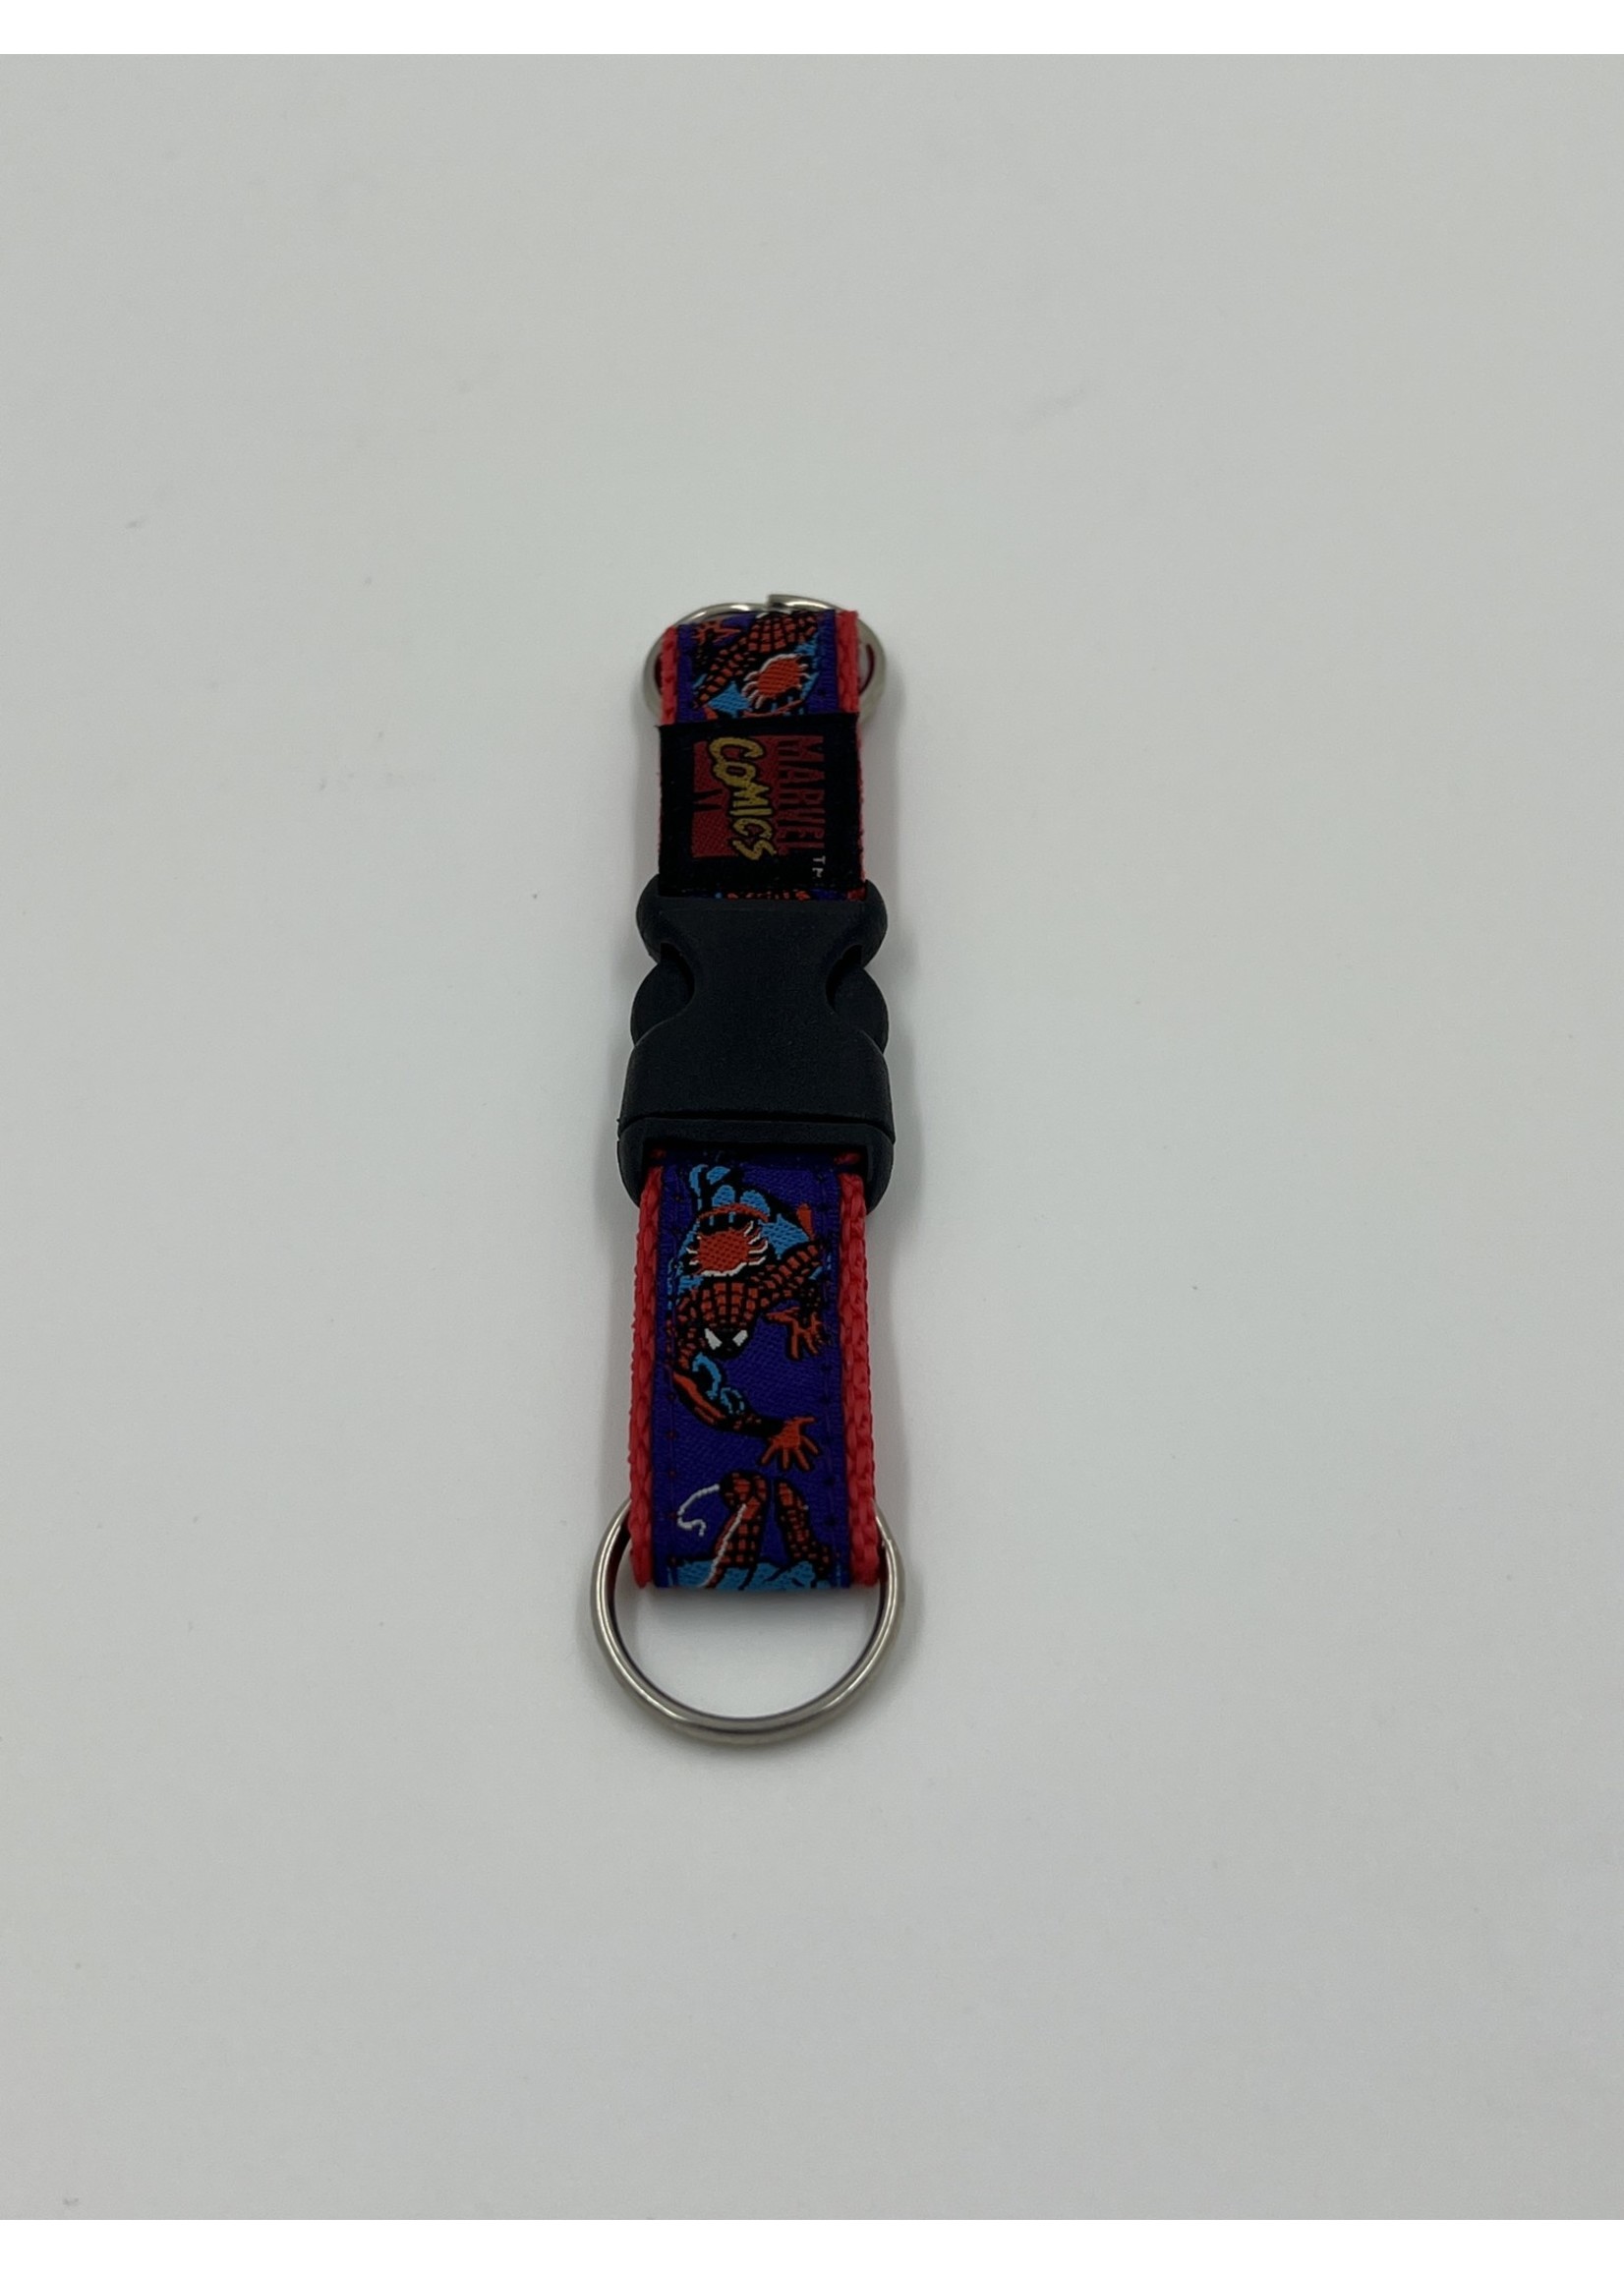 Other Things Marvel Snap Away Spiderman Key Chain